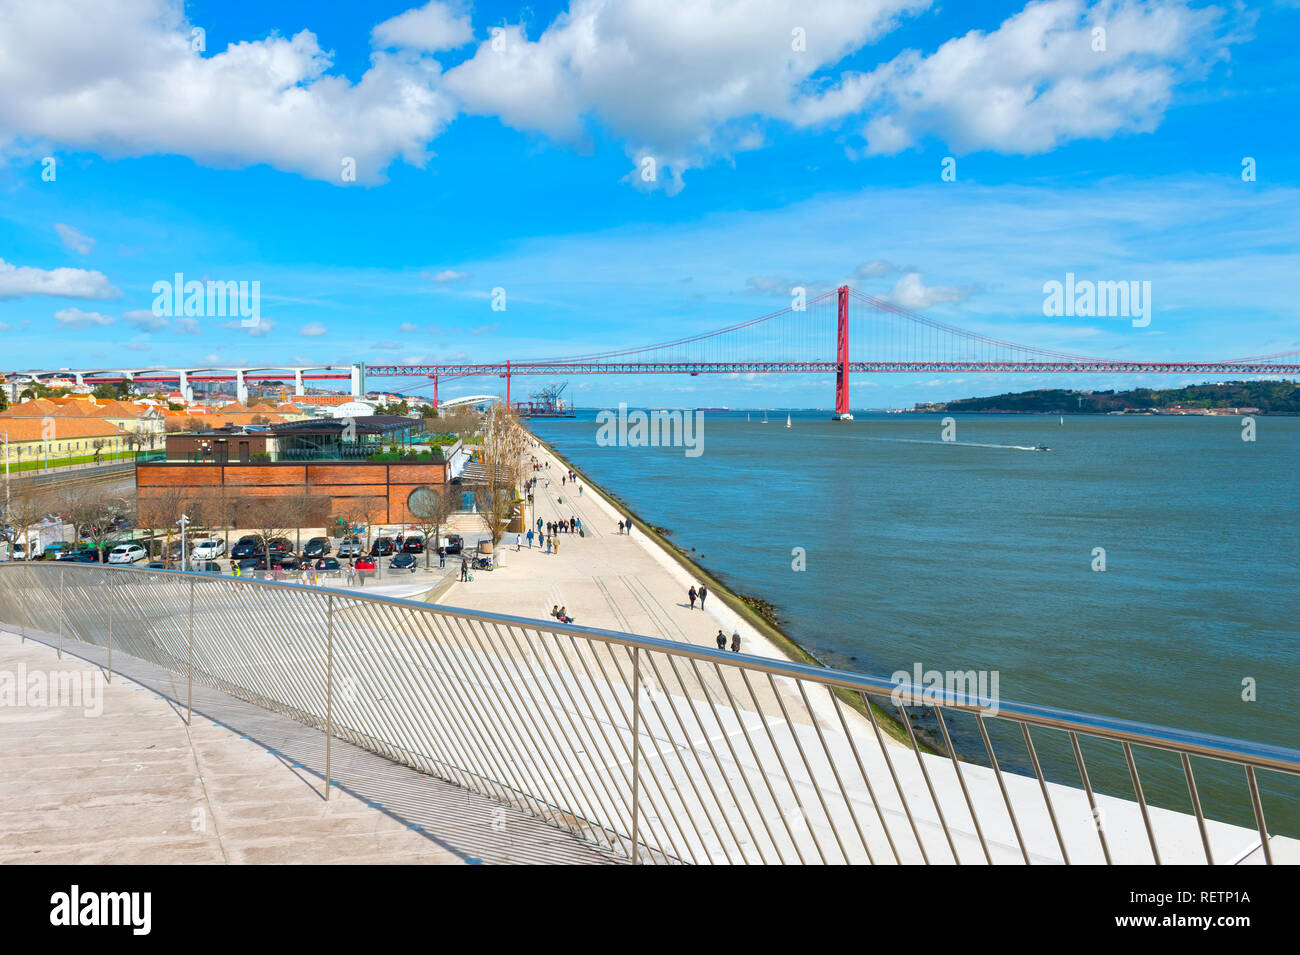 25 April Bridge, former Salazar bridge, over Tagus river viewed from the top of the MAAT, Museum of Art Architecture and Technology, Lisbon, Portugal Stock Photo